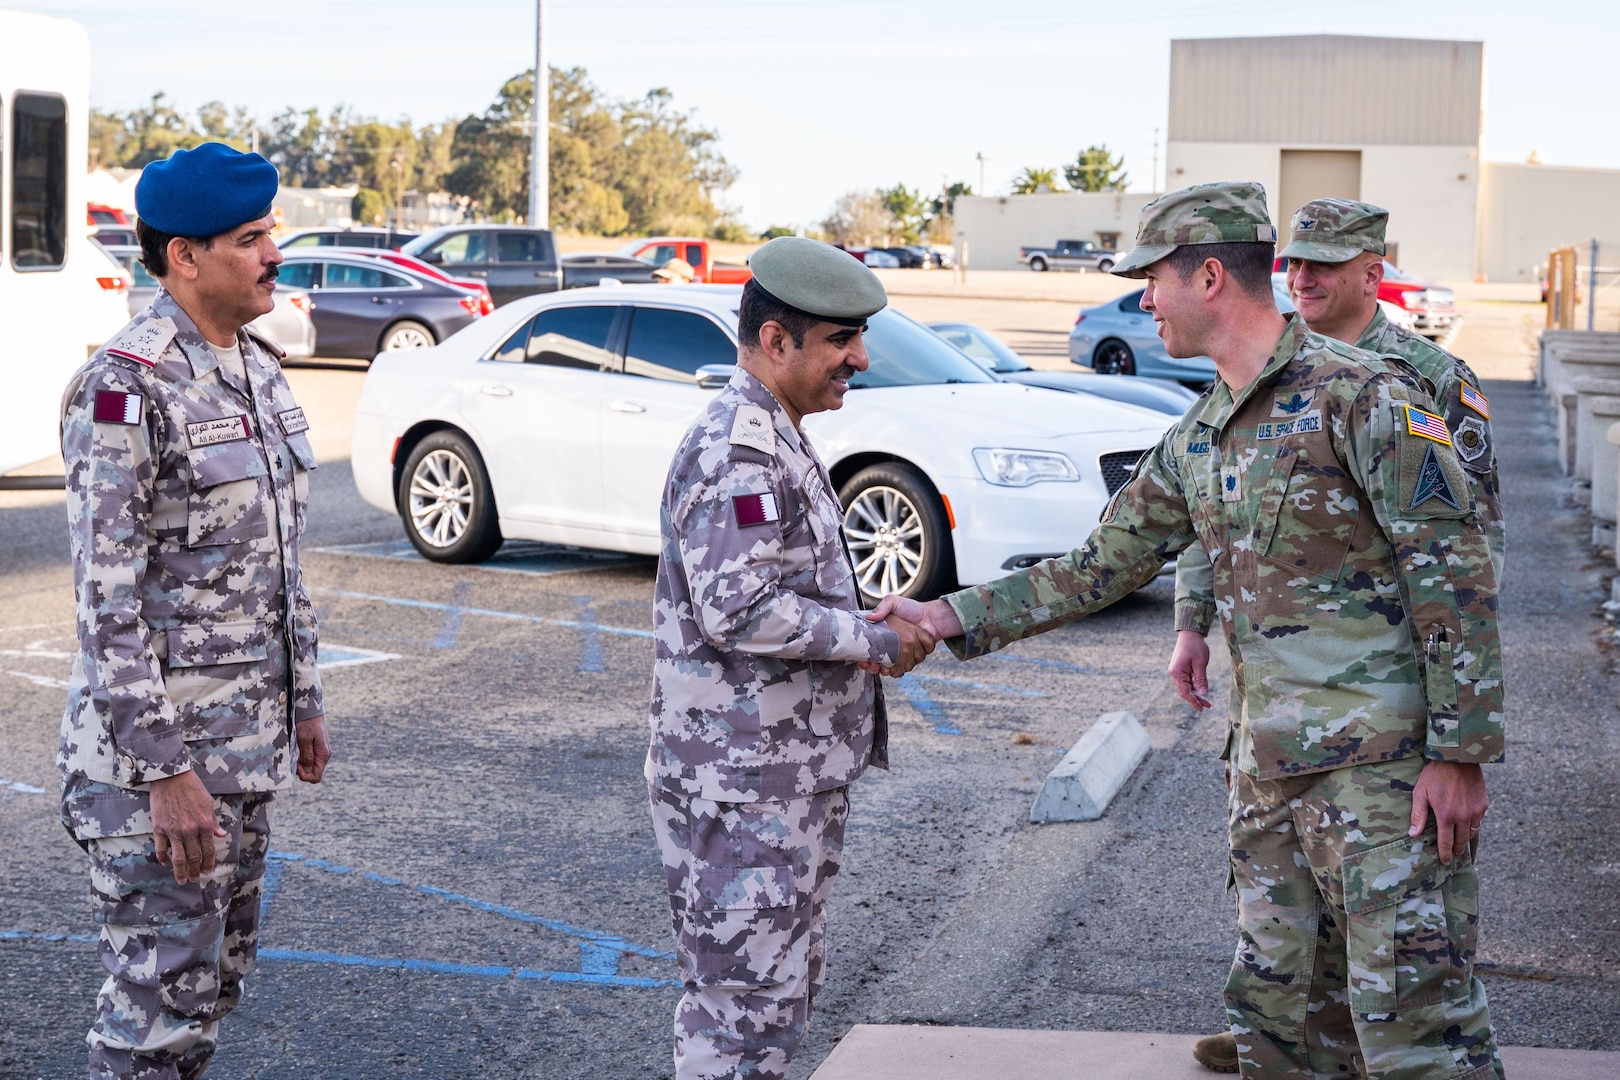 A Qatari Armed Forces General Shakes hands with a U.S. Space Force Lieutenant Colonel outside a building.